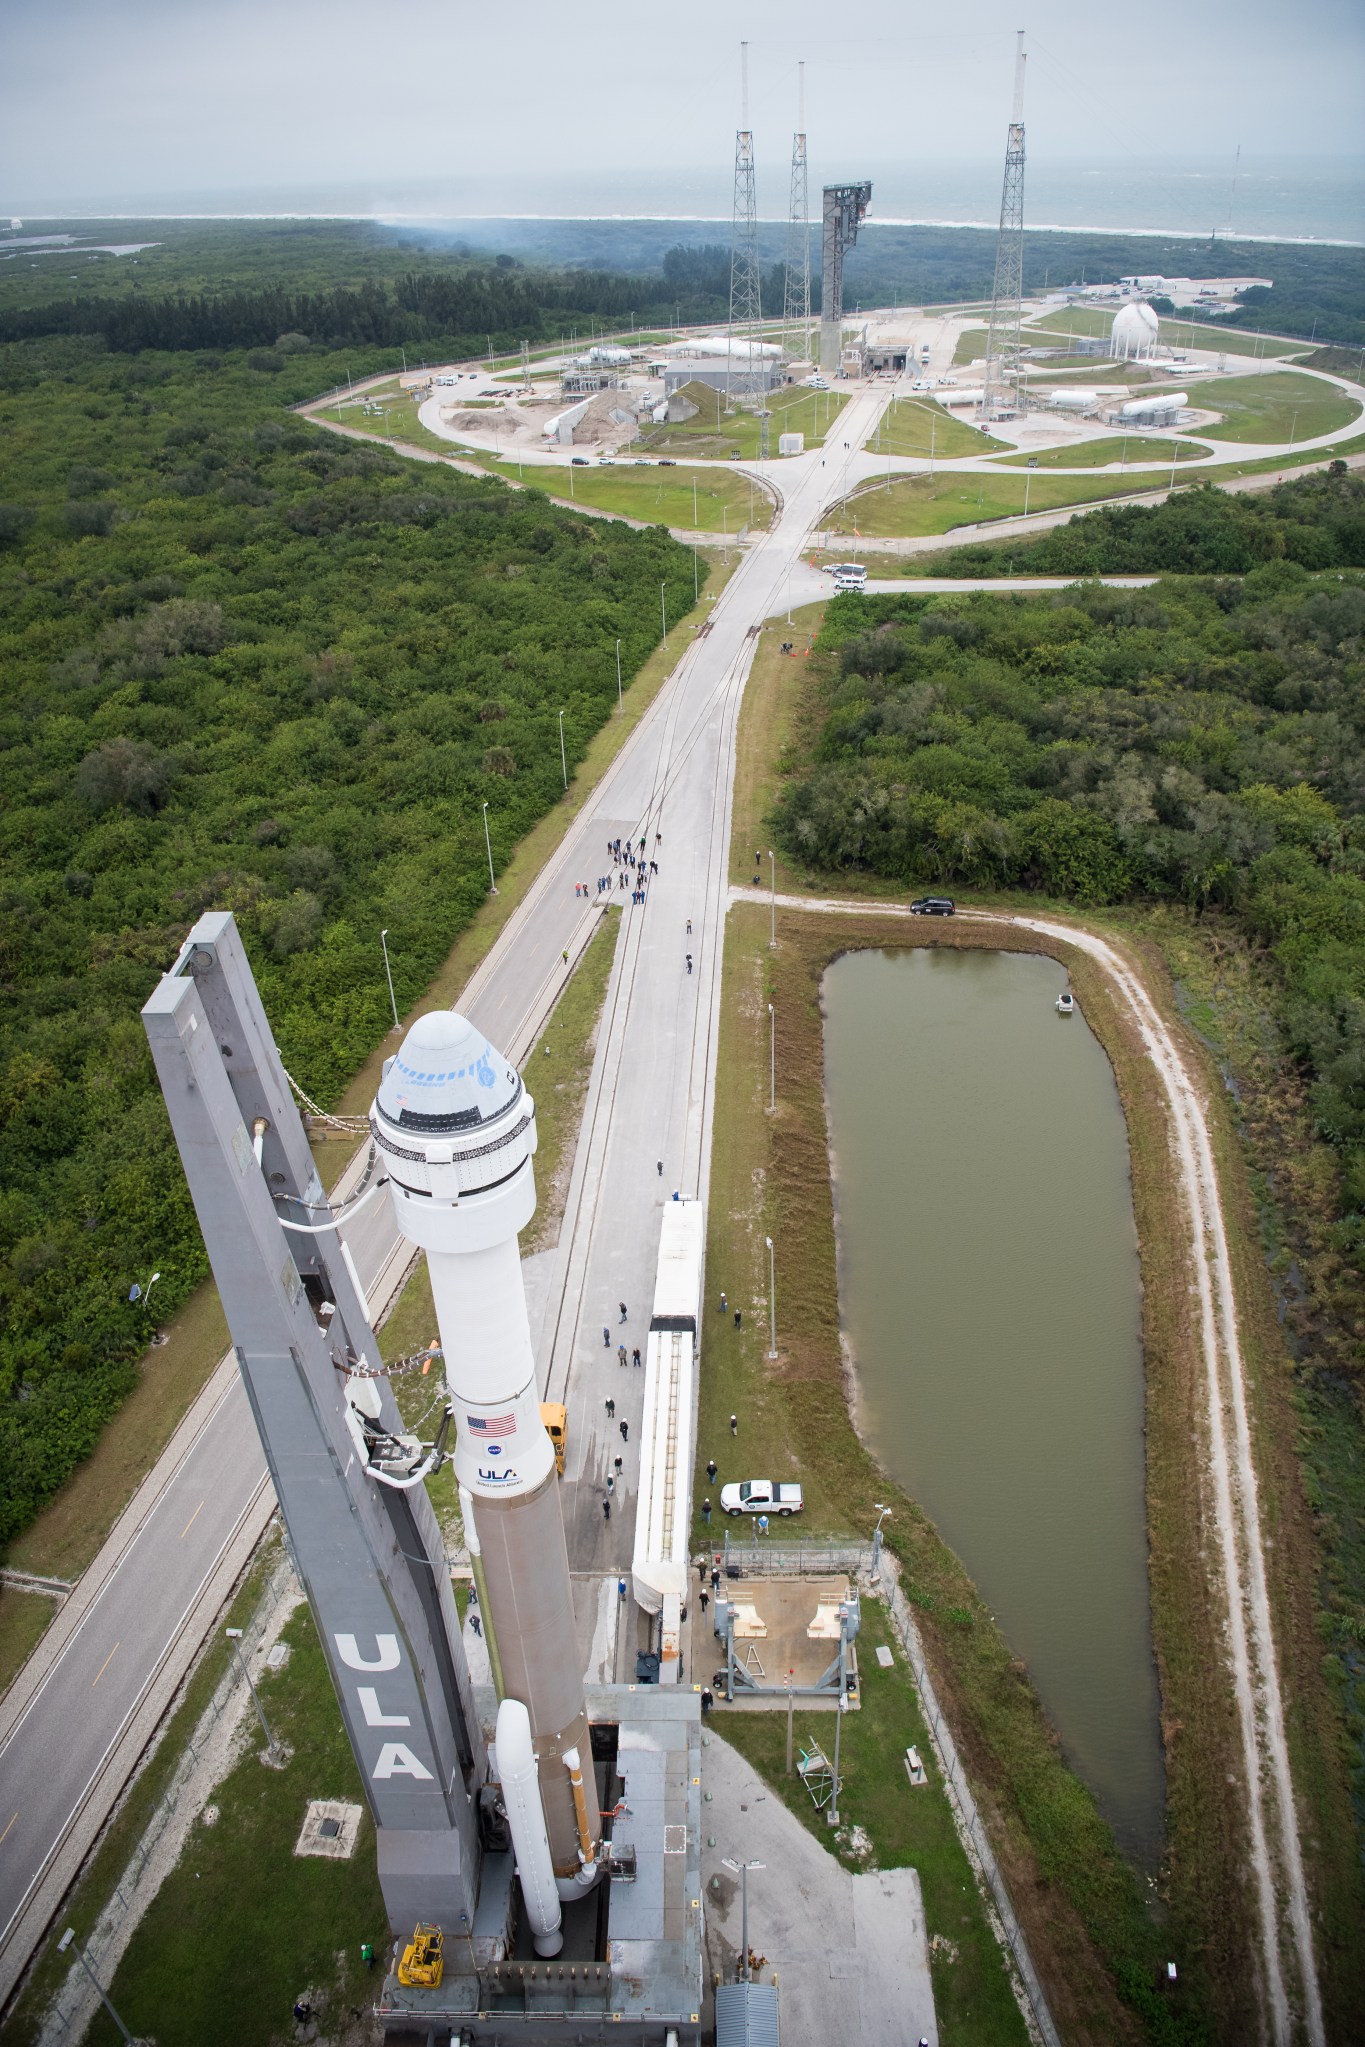 A United Launch Alliance Atlas V rocket with Boeing’s CST-100 Starliner spacecraft onboard.